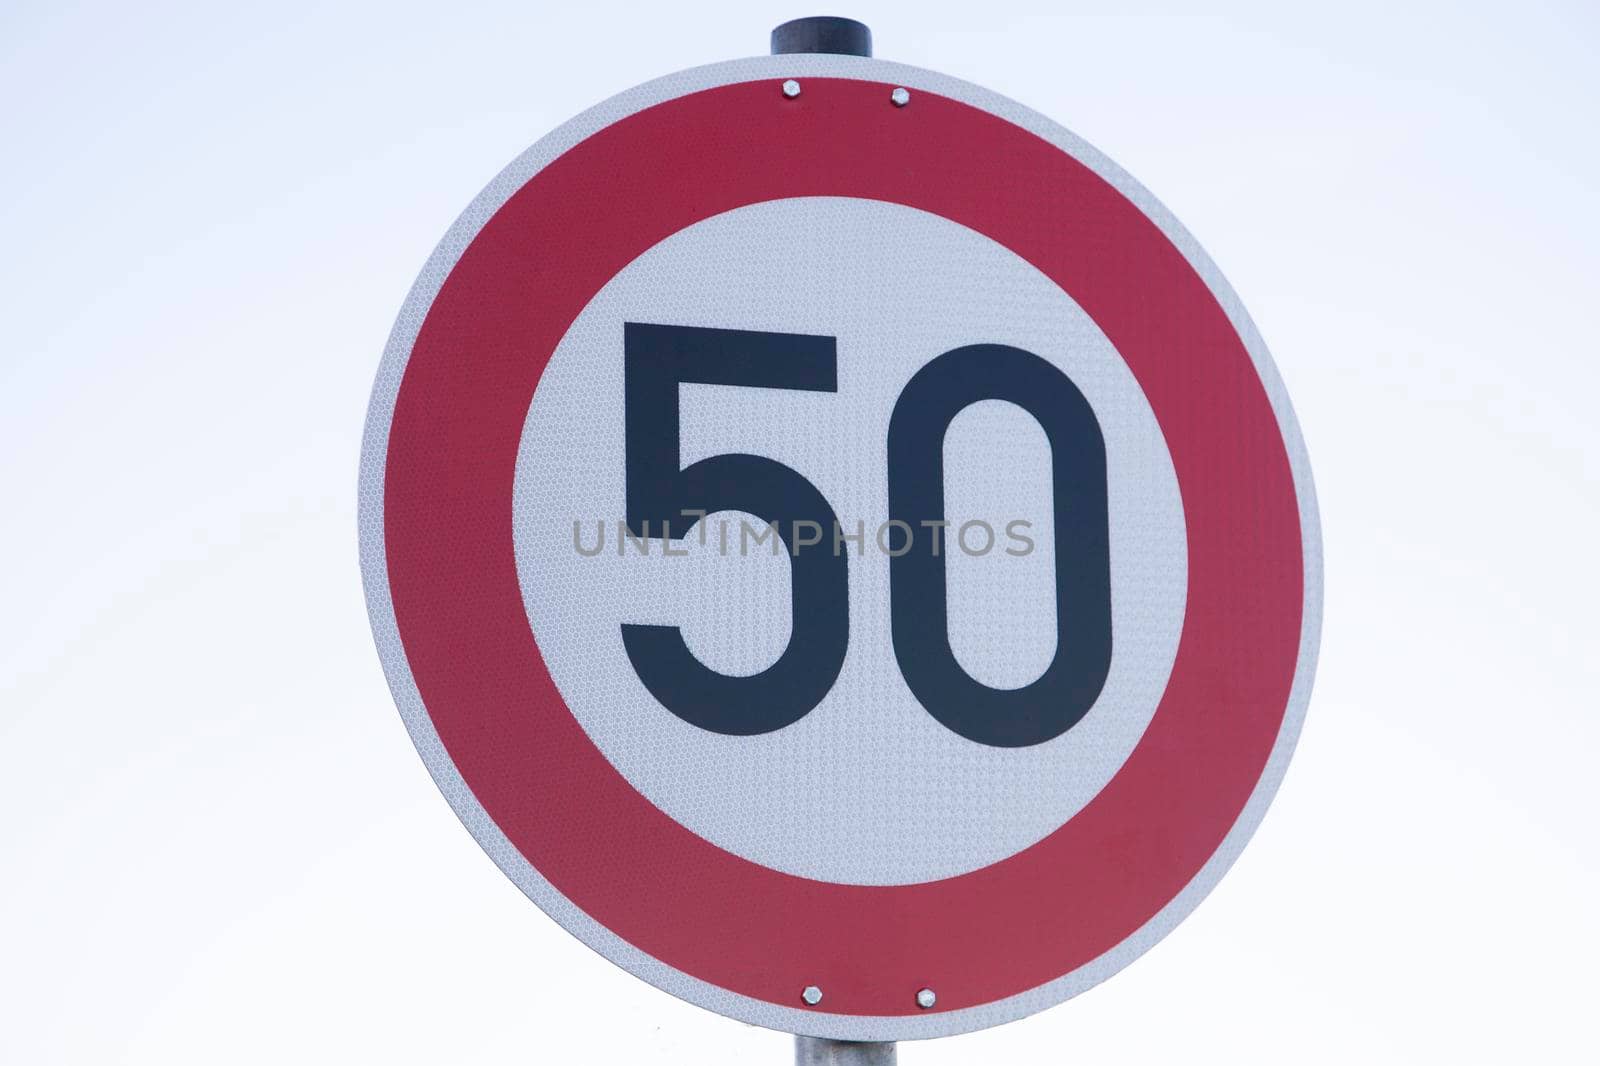 Speed limit traffic sign on white background by Kasparart